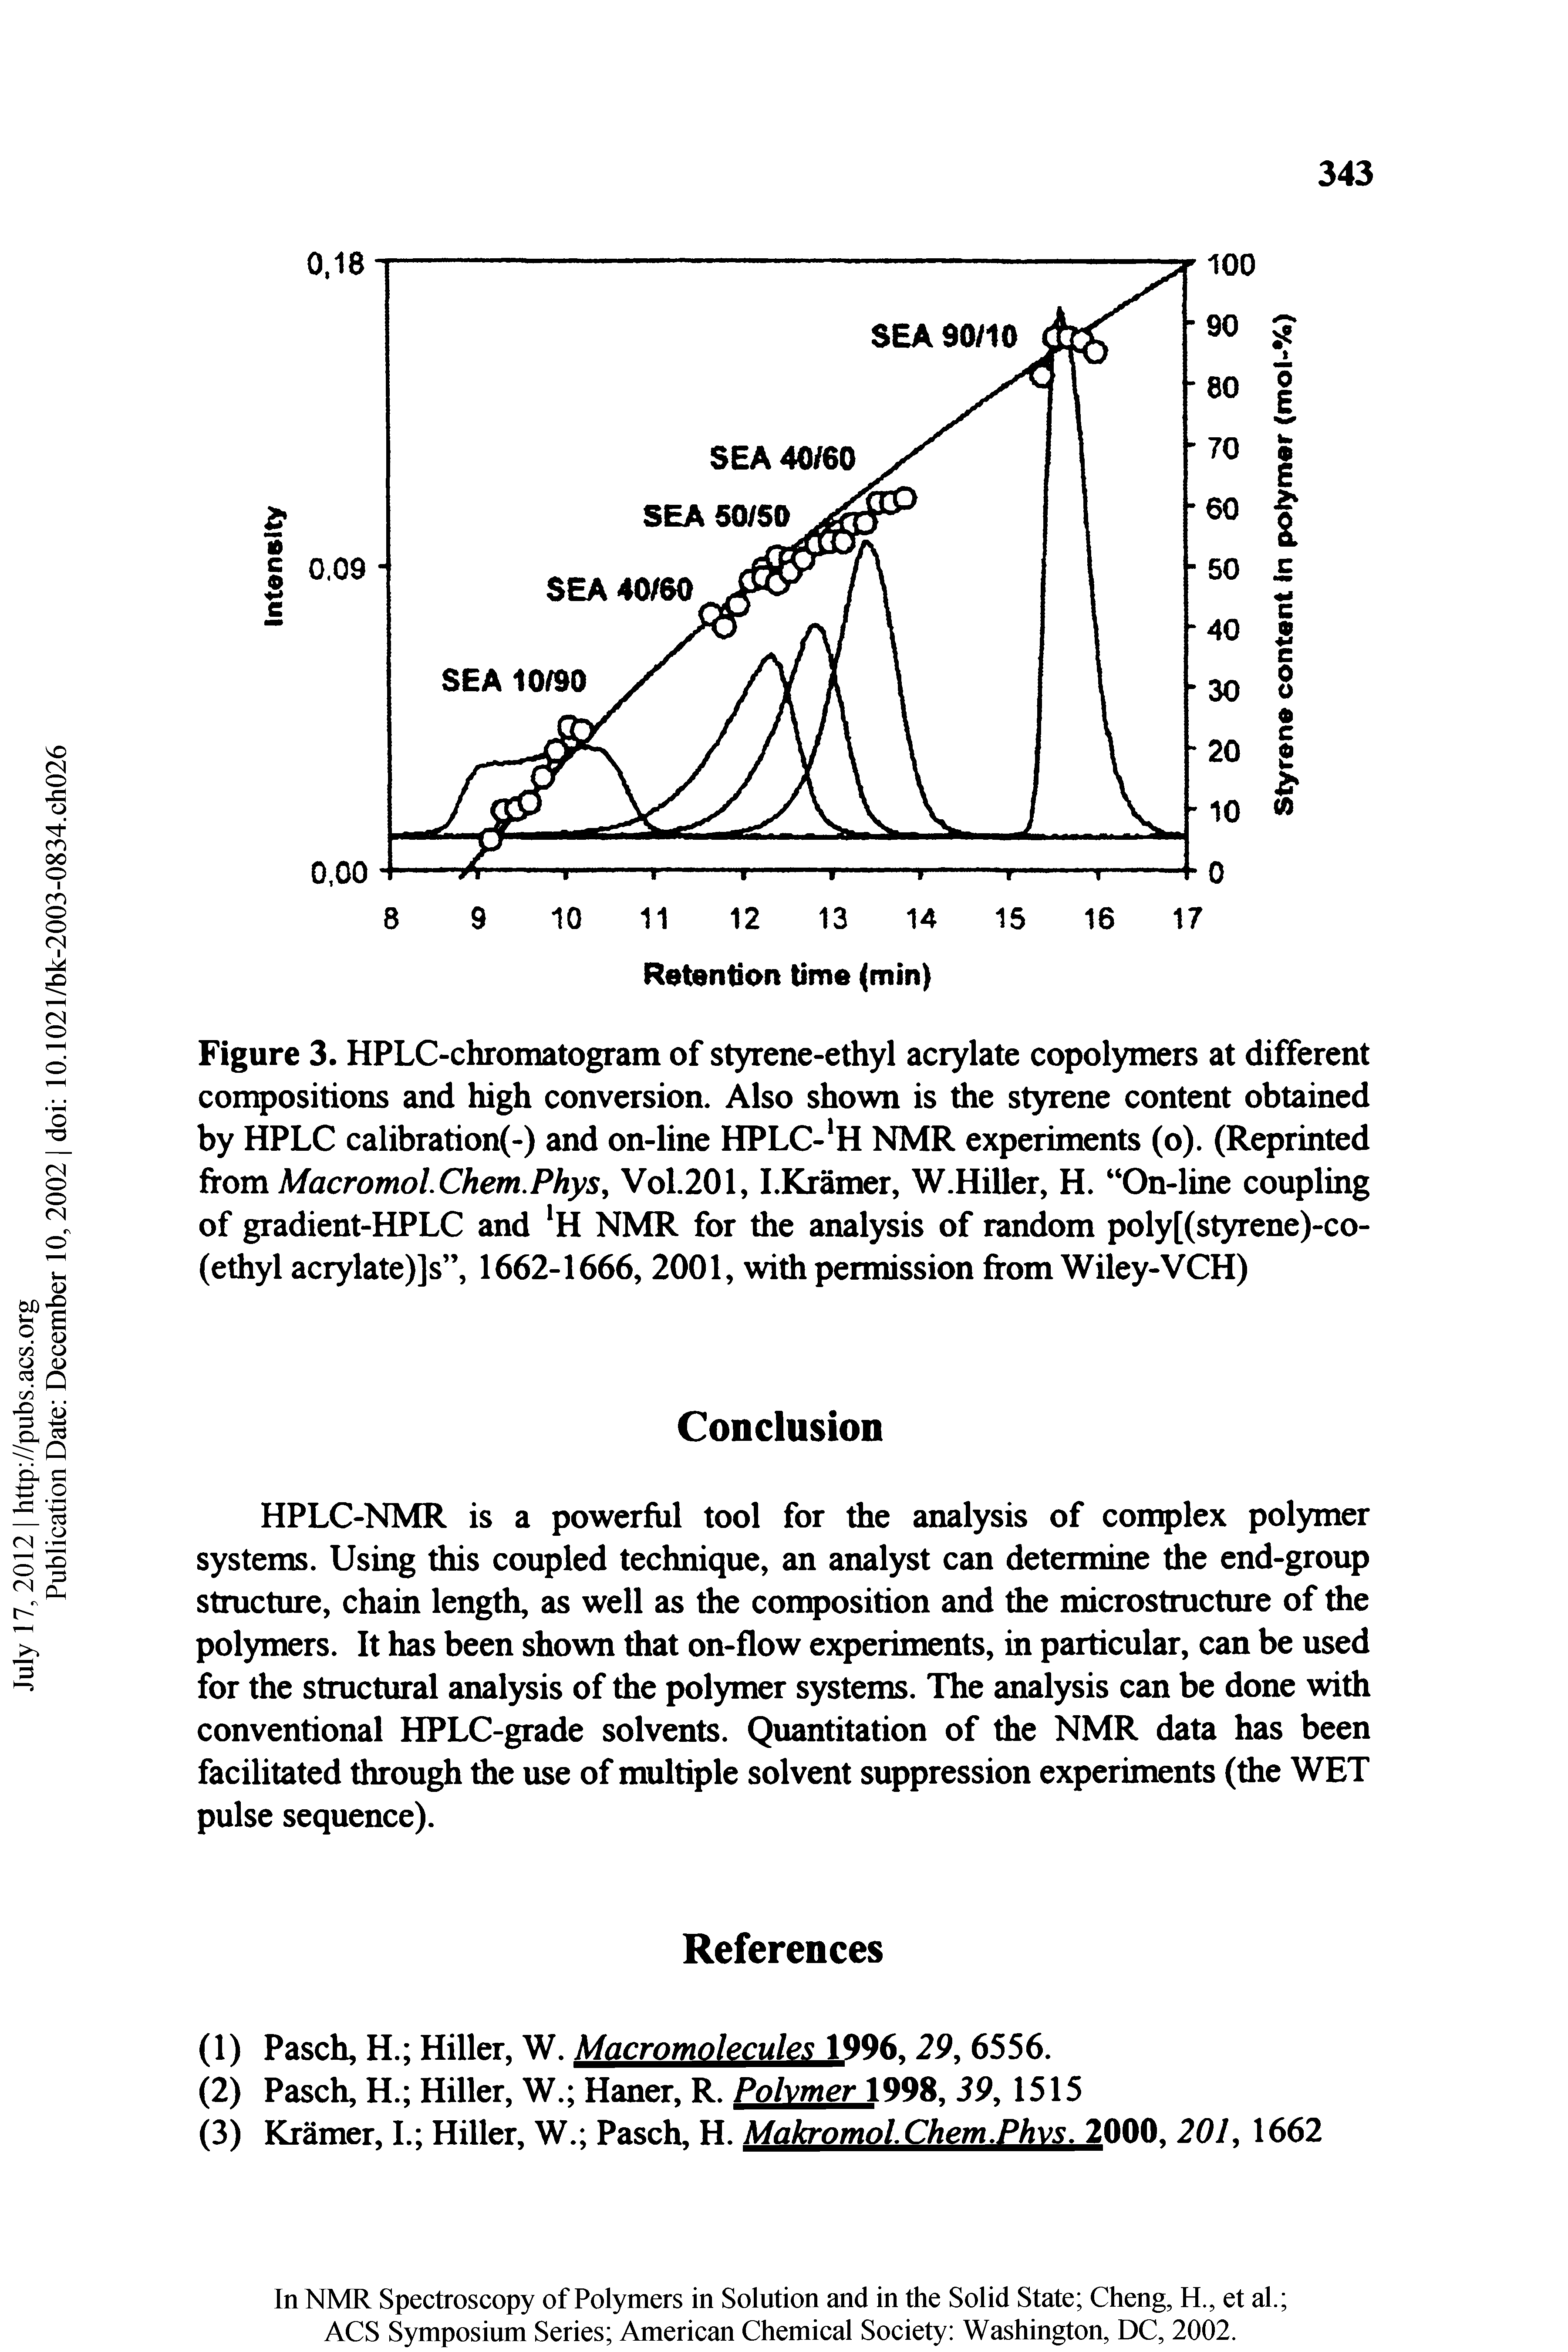 Figure 3. HPLC-chromatogram of styrene-ethyl acrylate copolymers at different compositions and high conversion. Also shown is the styrene content obtained by HPLC calibration -) and on-line HPLC- H NMR experiments (o). (Reprinted from MacromolChem.Phys, Vol.201, LKramer, W.HiUer, H. On-line coupling of gradient-HPLC and NMR for the analysis of random poly[(styrene)-co-(ethyl acrylate)]s , 1662-1666, 2001, with permission from Wiley-VCH)...